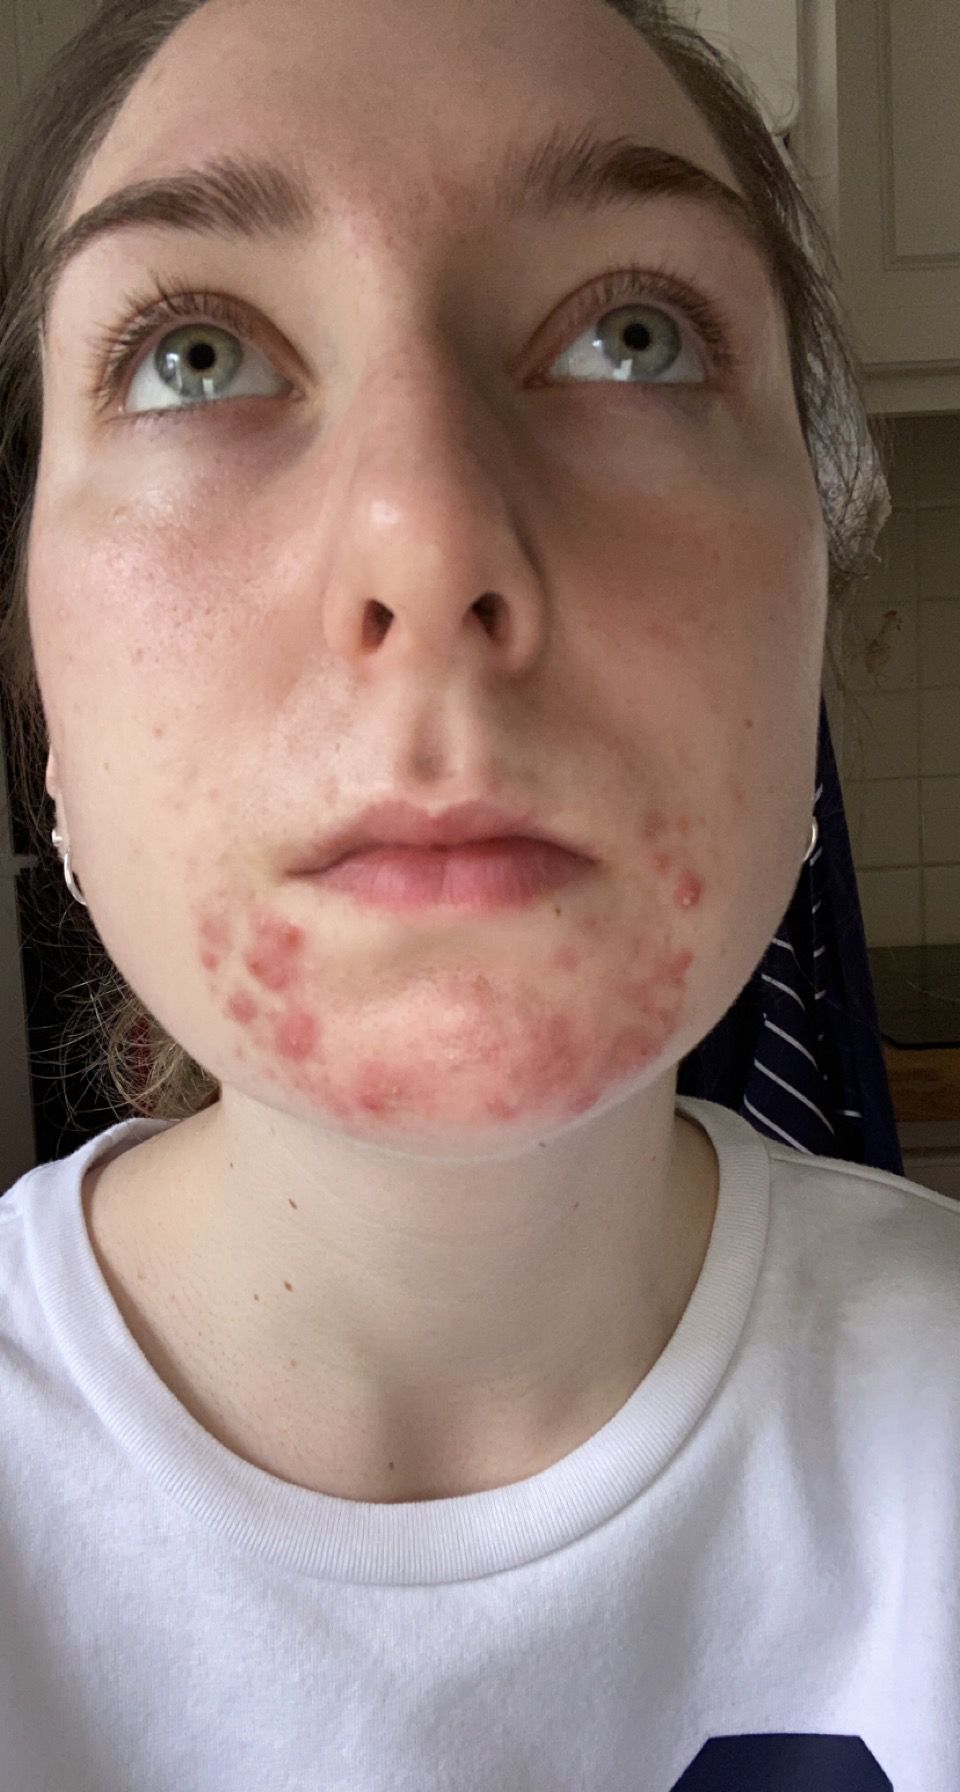 Kate found a solution for her acne using data and artificial intelligence